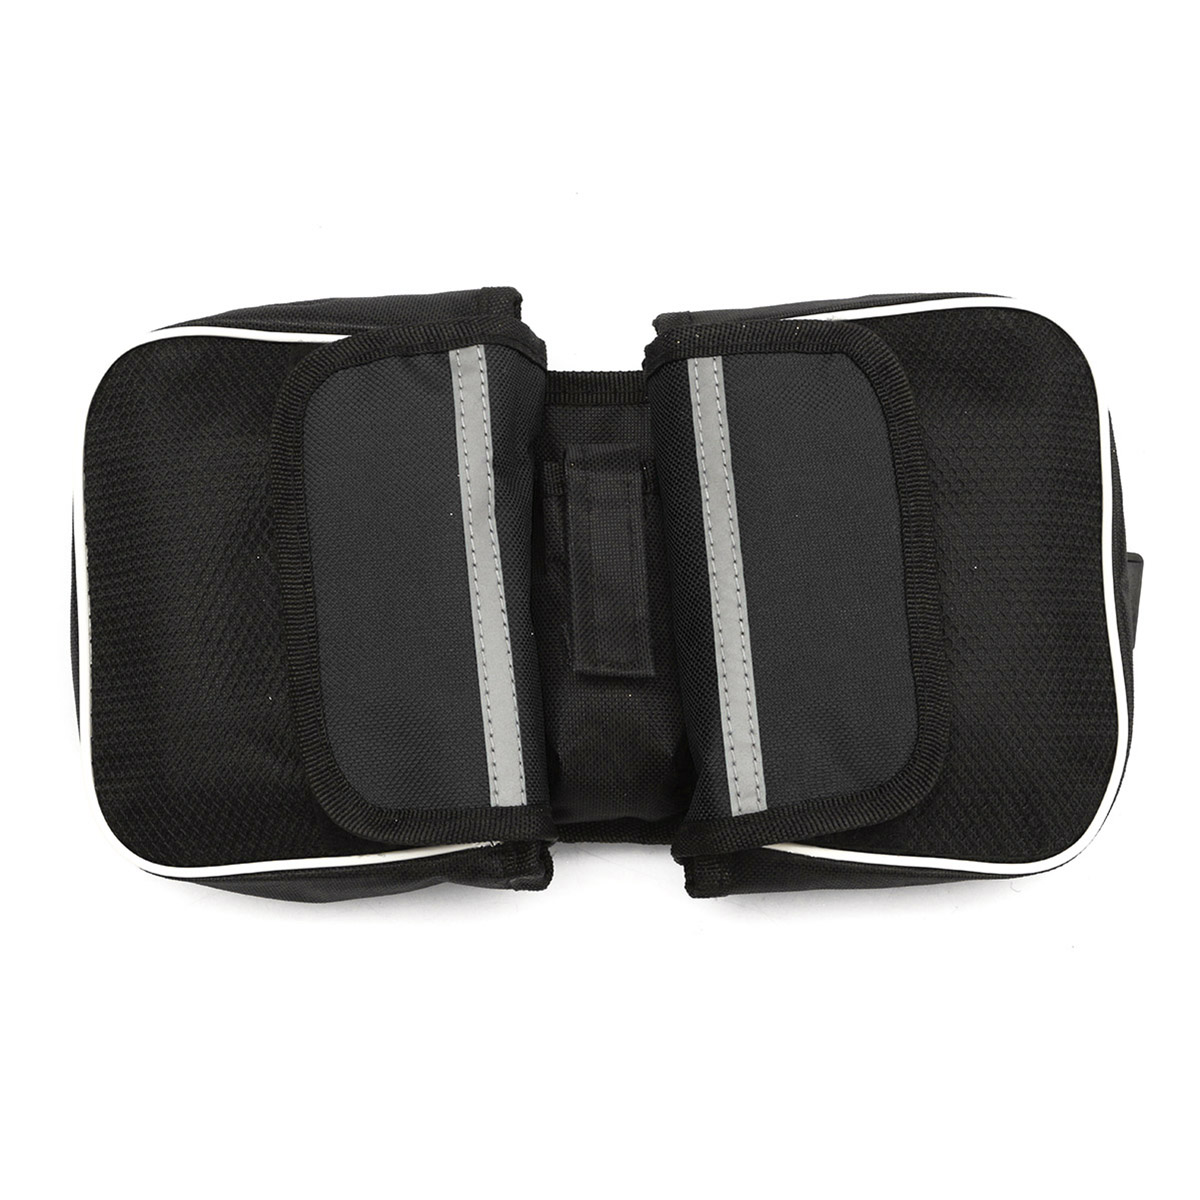 Bicycle-Bike-Front-Frame-Tube-Mobile-Phone-Pannier-Saddle-Bag-Case-Holder-Pouch-1110040